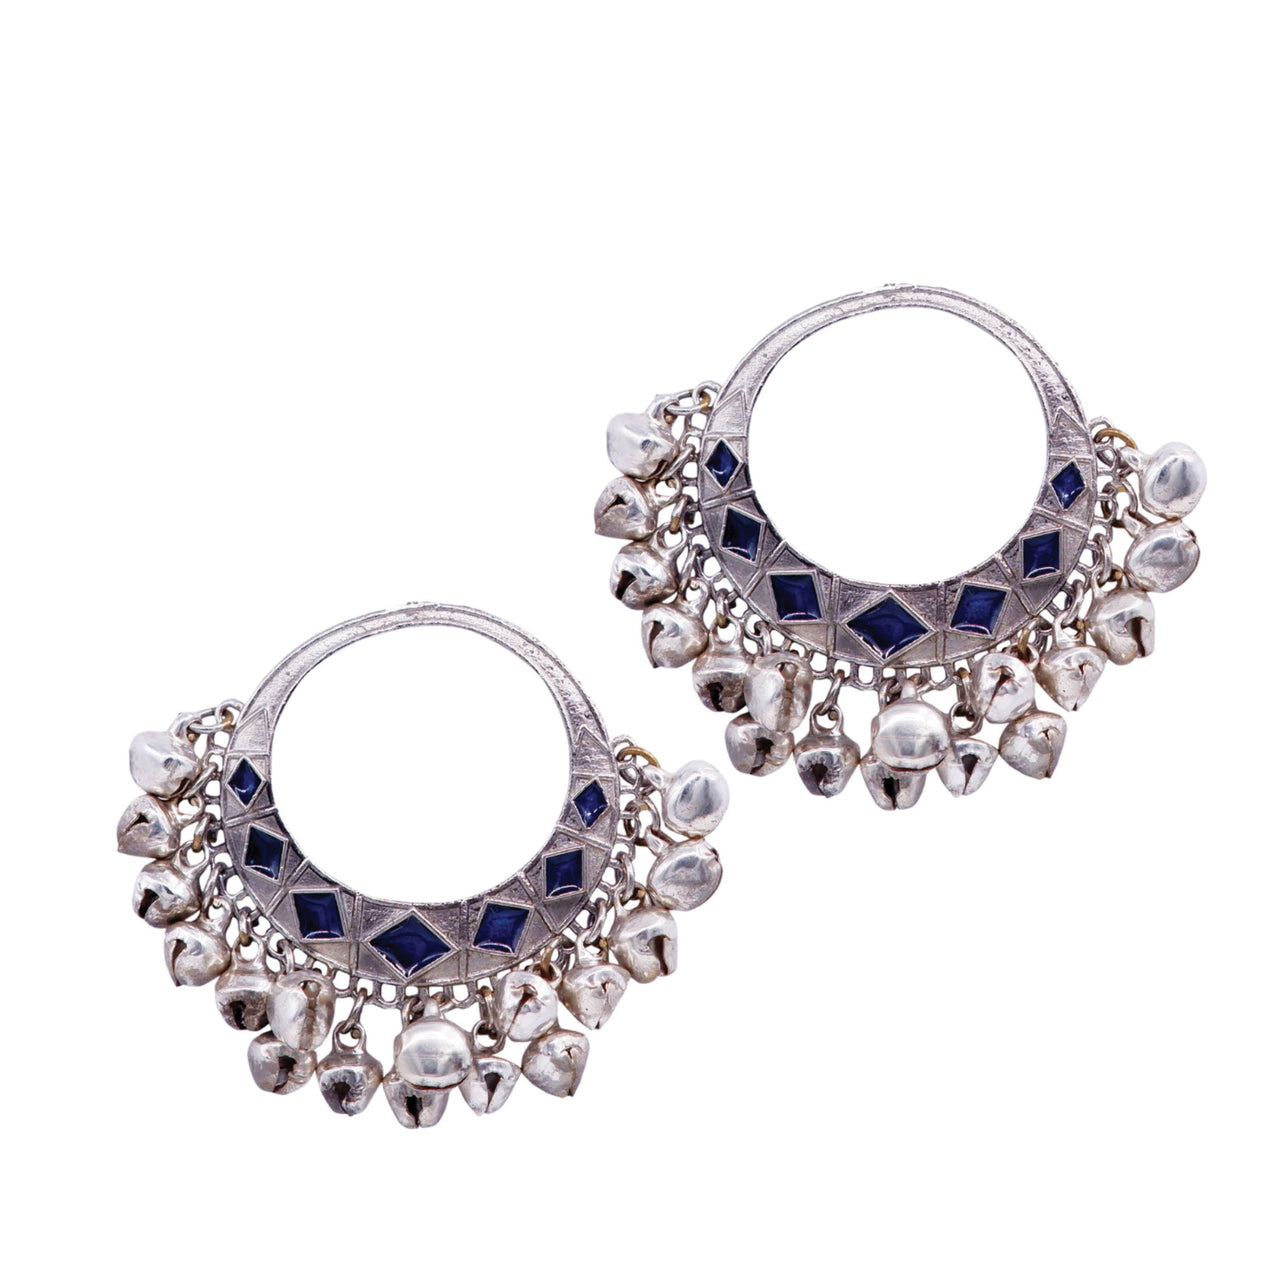 Silver plated earrings with trinklets and blue stones